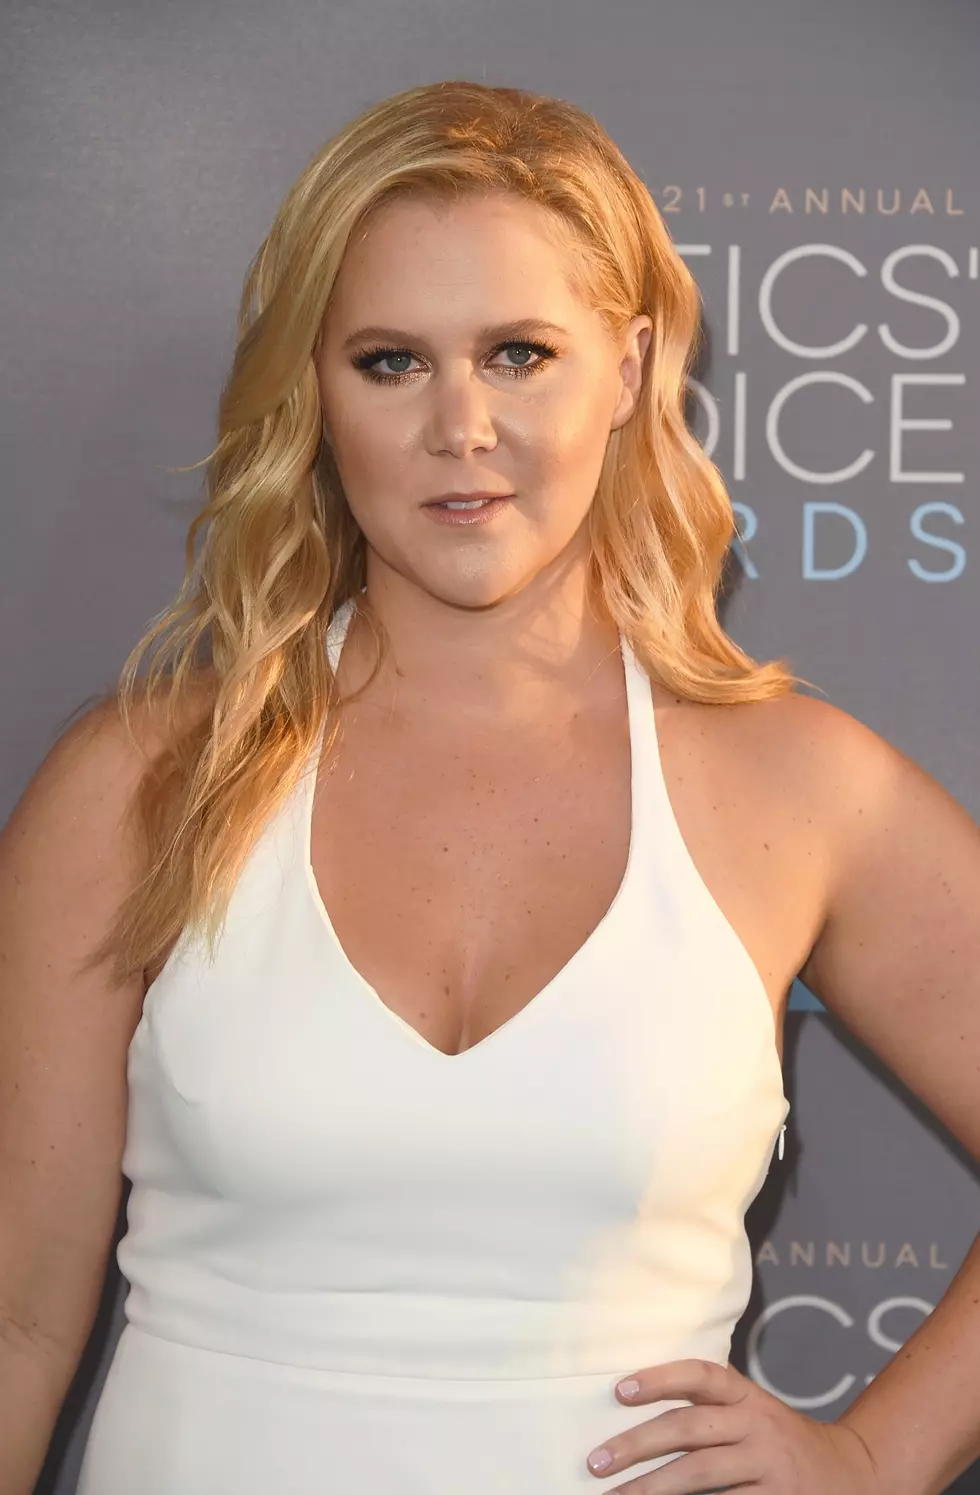 Albany Film Critic Faces Twitter Backlash After Amy Schumer Joke